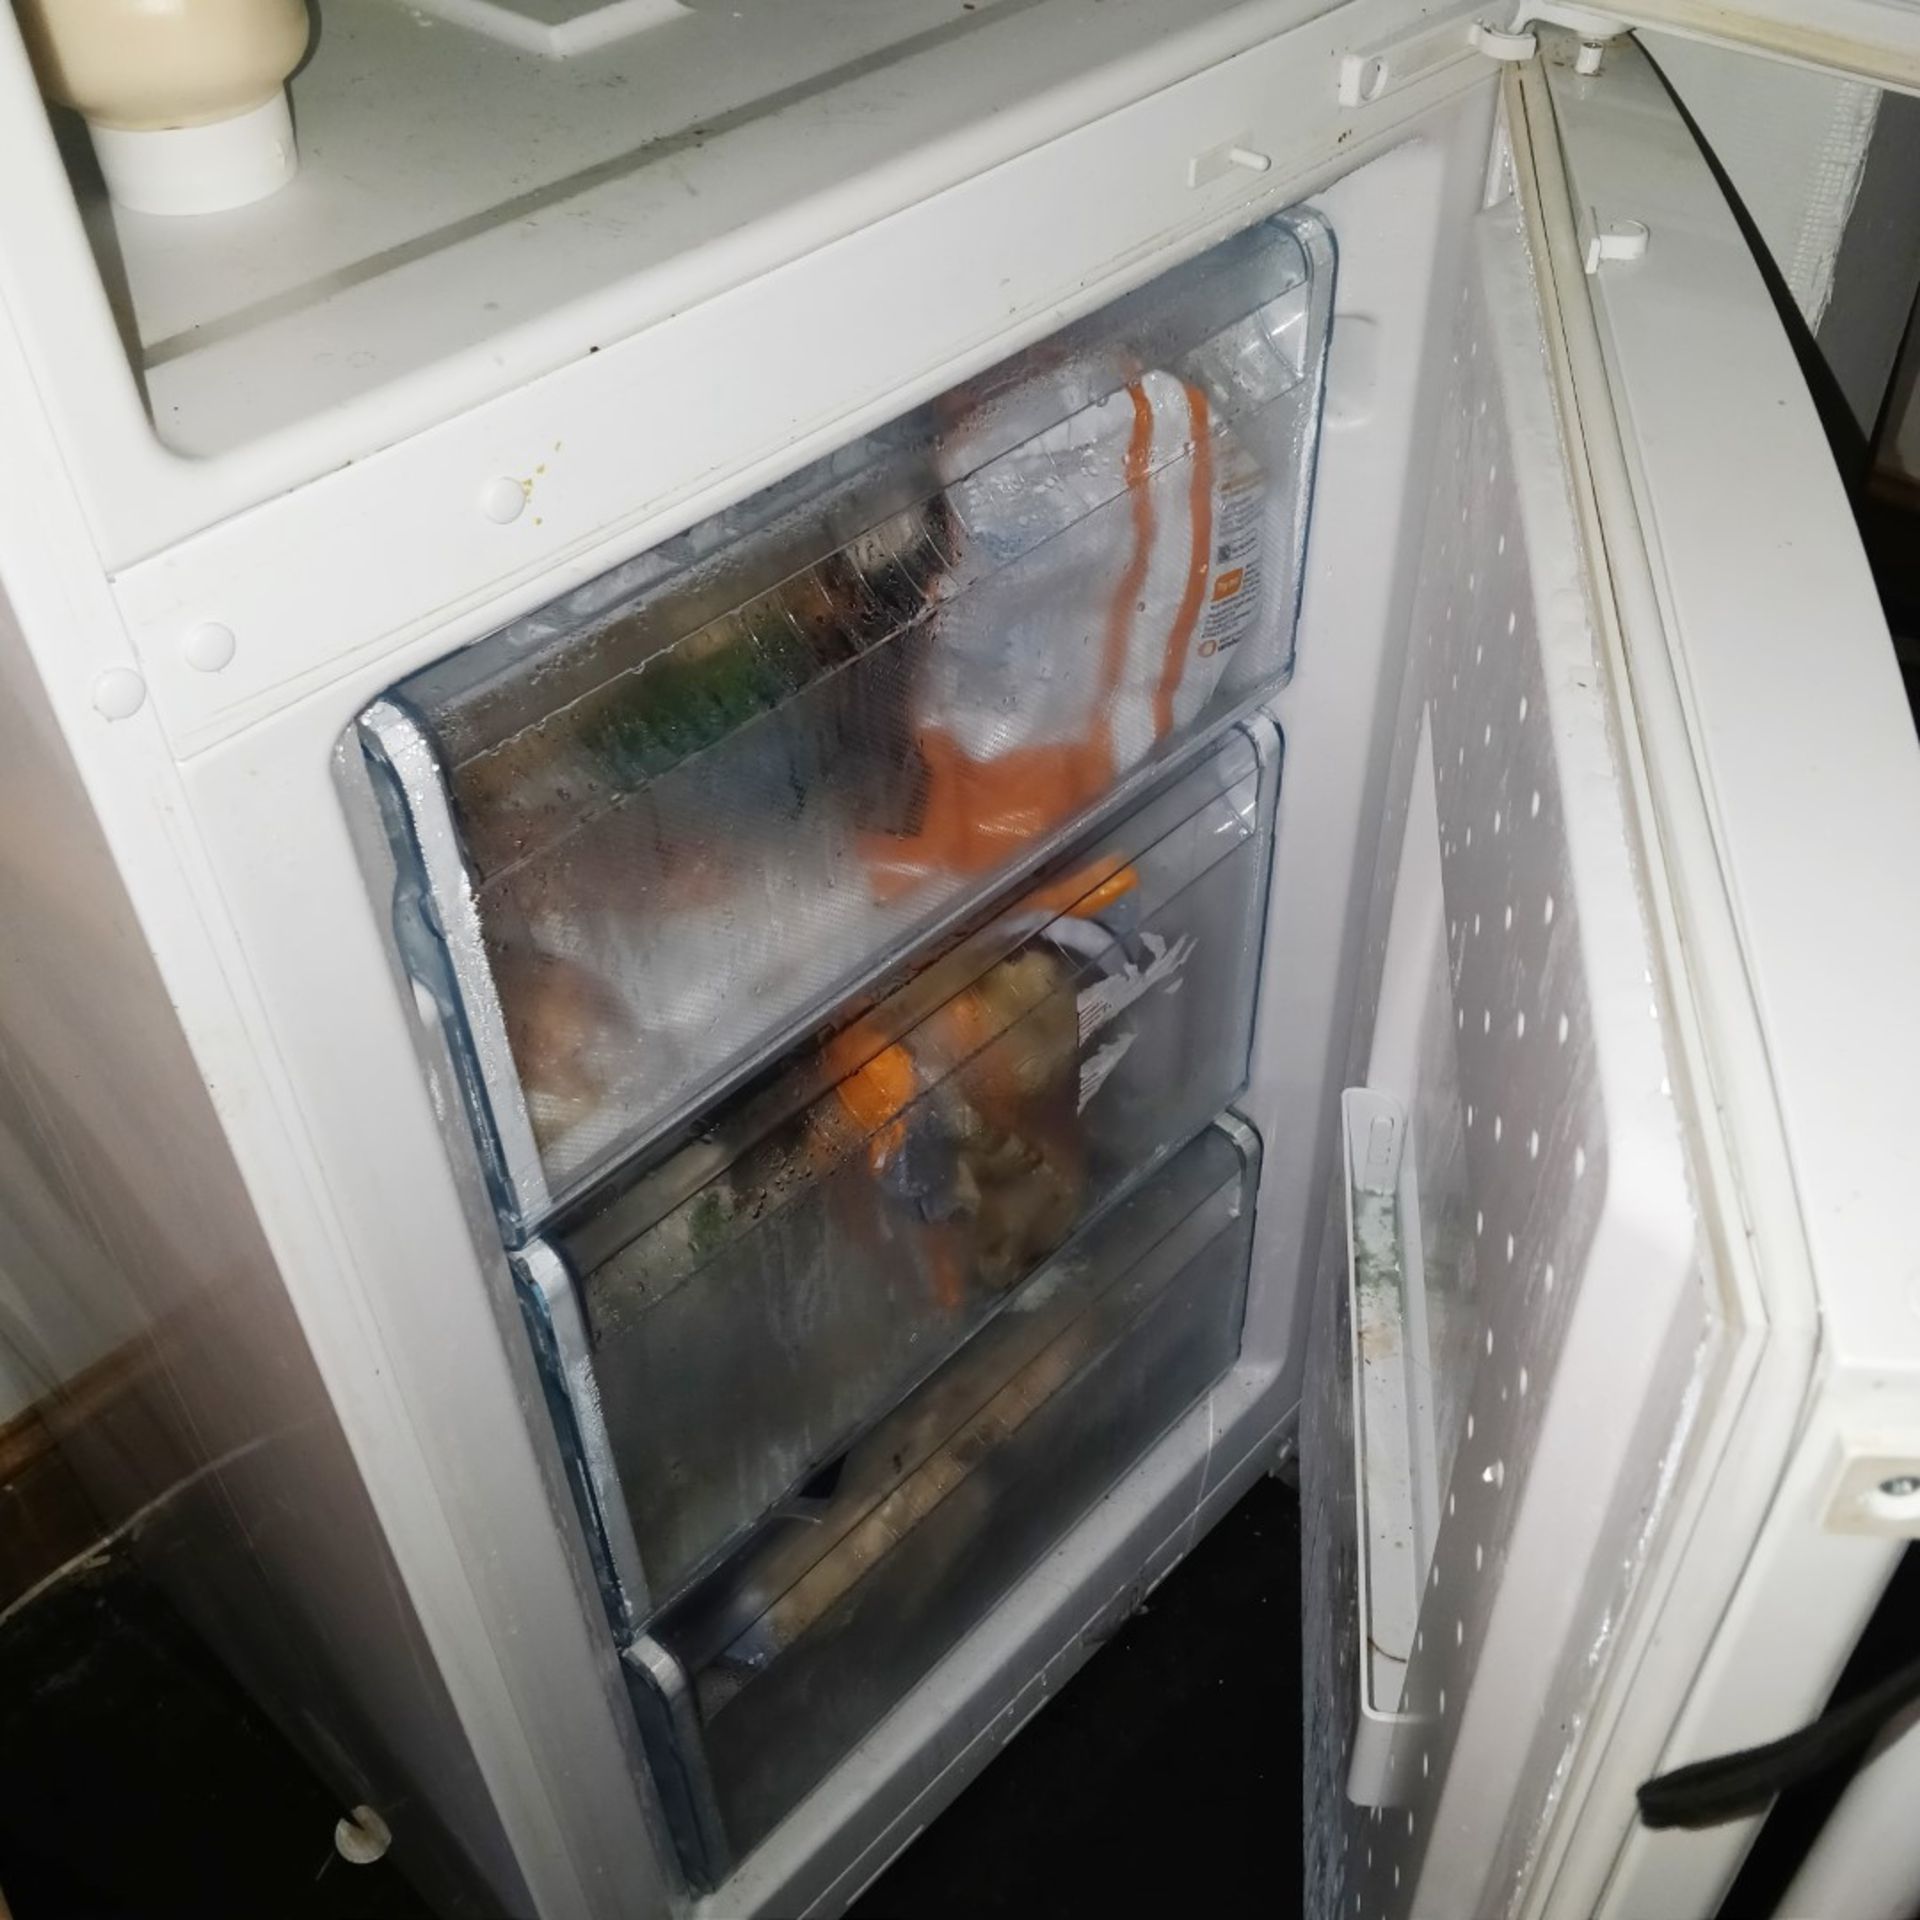 1 x Bosch Upright Fridge Freezer - CL586 - Location: Stockport SK1 This item is to be removed from a - Bild 2 aus 5